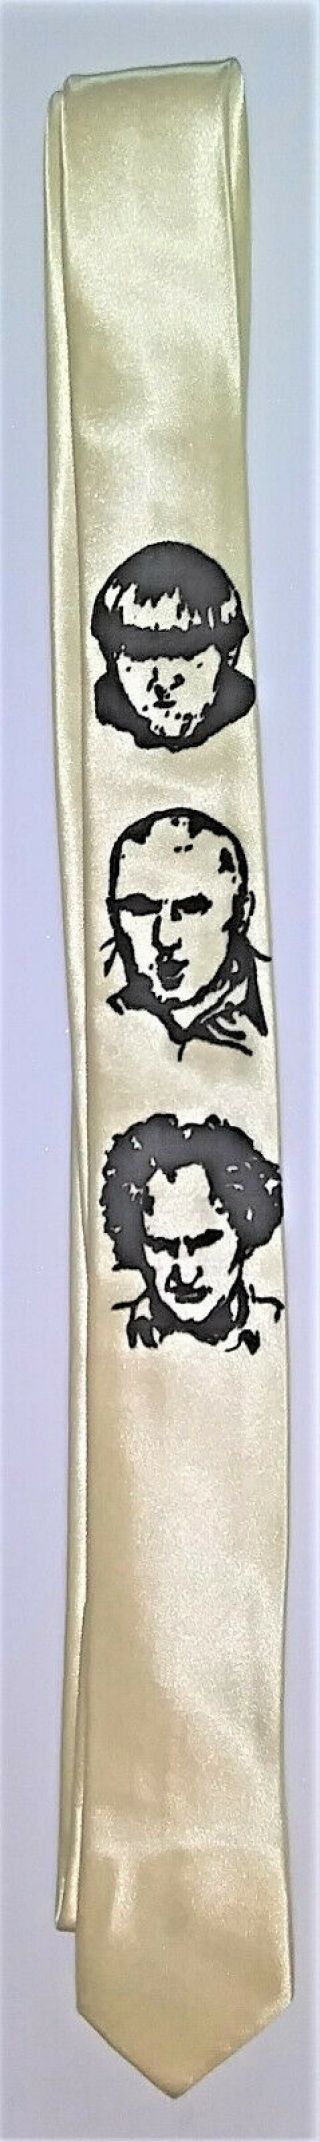 “the Three Stooges” (moe & Curly Howard & Larry Fine) Thin Novelty Dress Necktie